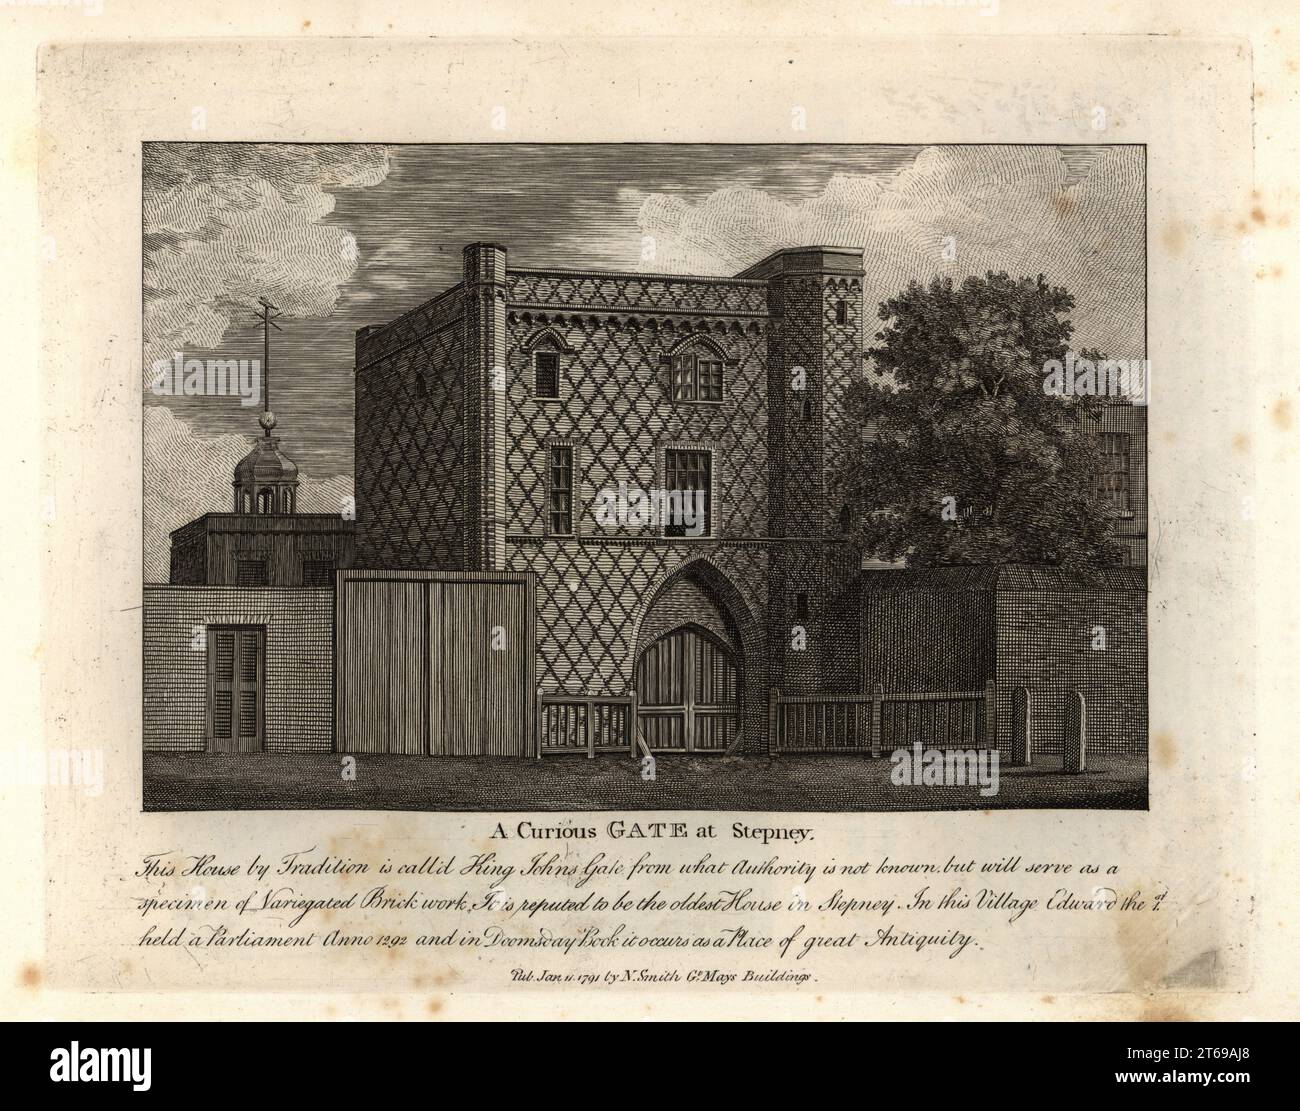 A curious gate in variegated brickwork called St. John Gate, the oldest house in Stepney. Copperplate engraving by John Thomas Smith after original drawings by members of the Society of Antiquaries from his J.T. Smiths Antiquities of London and its Environs, J. Sewell, R. Folder, J. Simco, London, 1791. Stock Photo